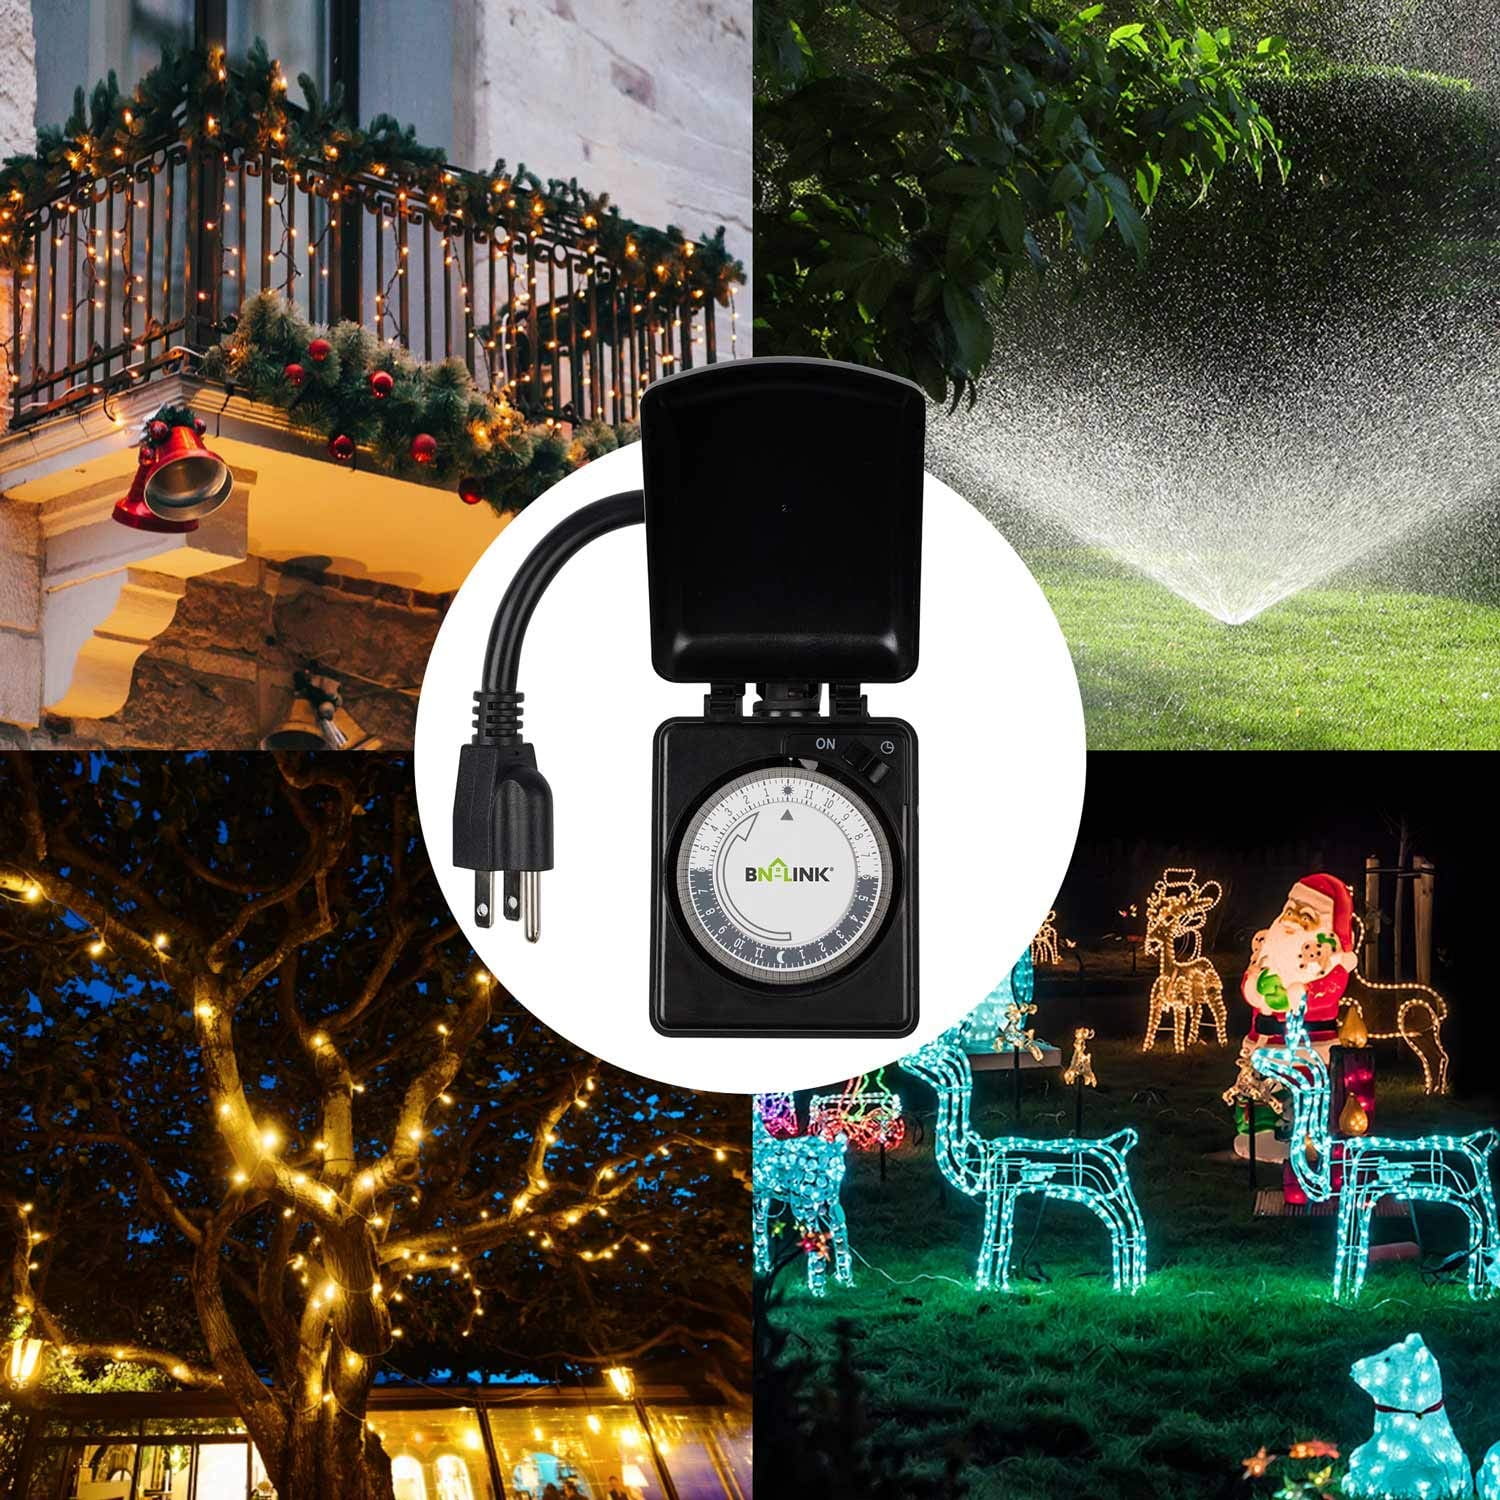 BN-LINK 7 Day Outdoor Heavy Duty Digital 24 Hour Programmable Timer, Dual  Outlet, Weatherproof, Heavy Duty, Accurate for Lamps Ponds Christmas Lights